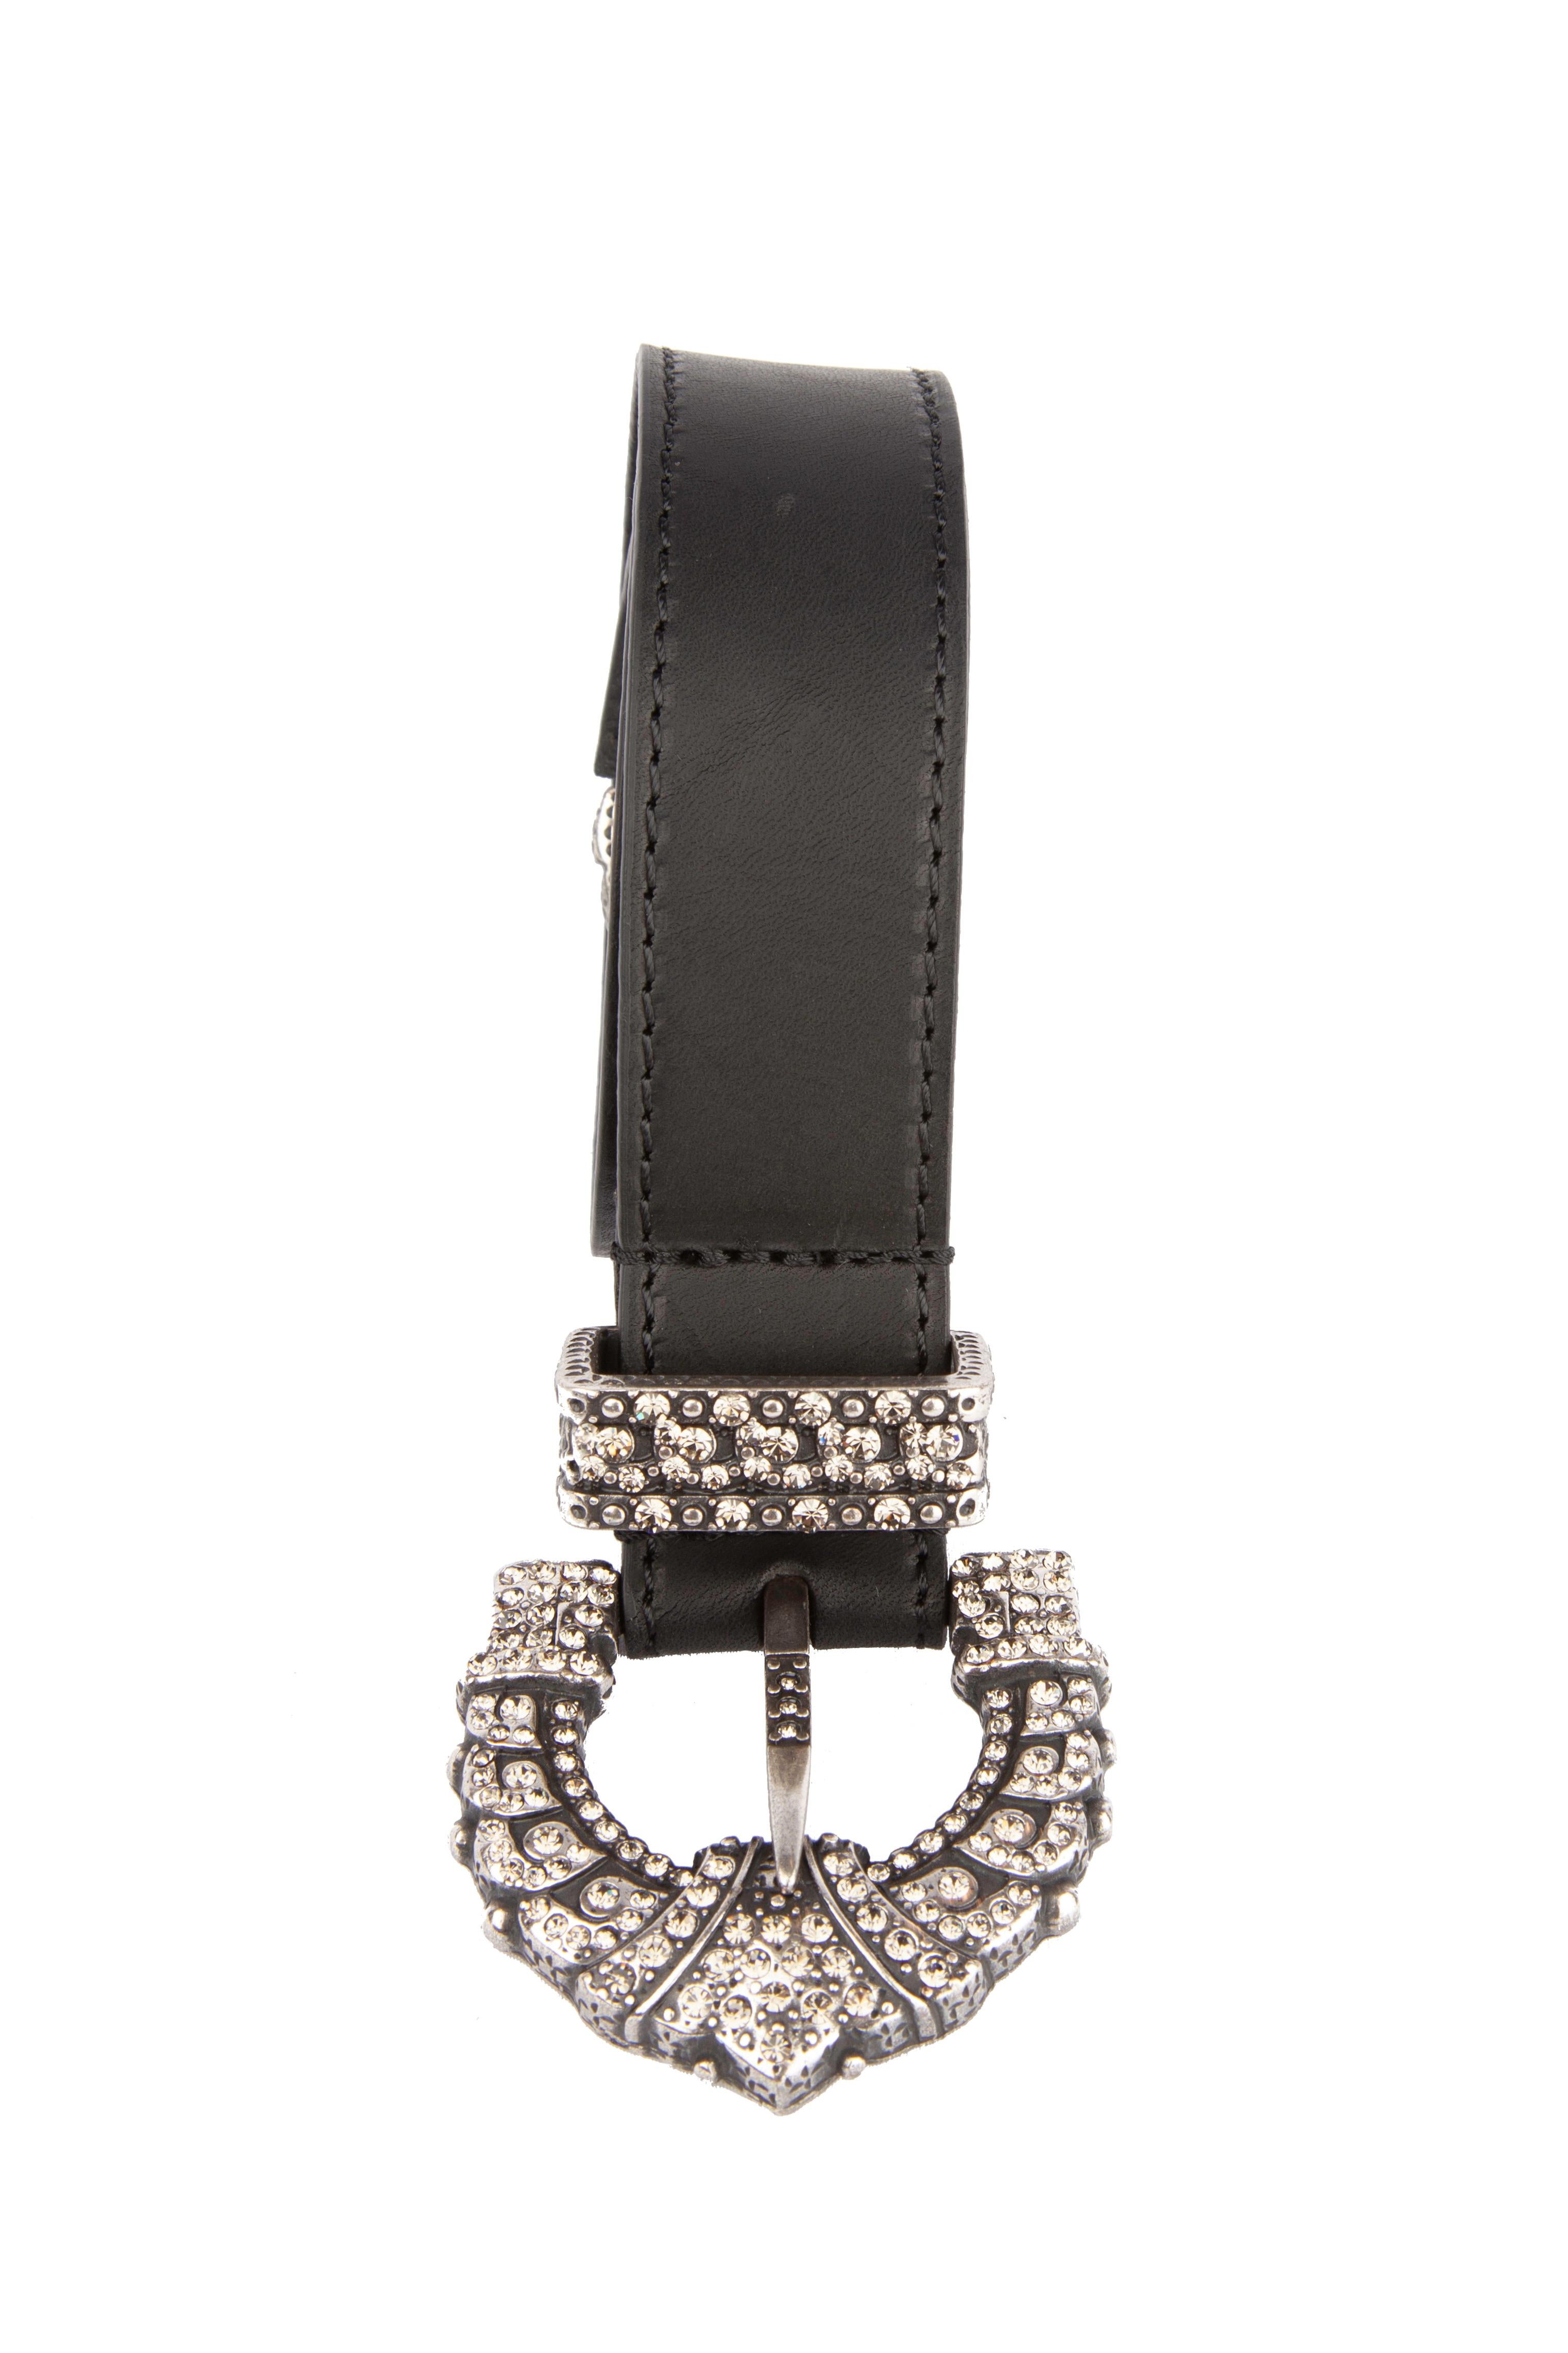 This Etro Fall 2019 Runway black calf leather belt features an adjustable fit and crystal embellishments. Brand new. Made in Italy.

Size: 85

Material: Calf Leather